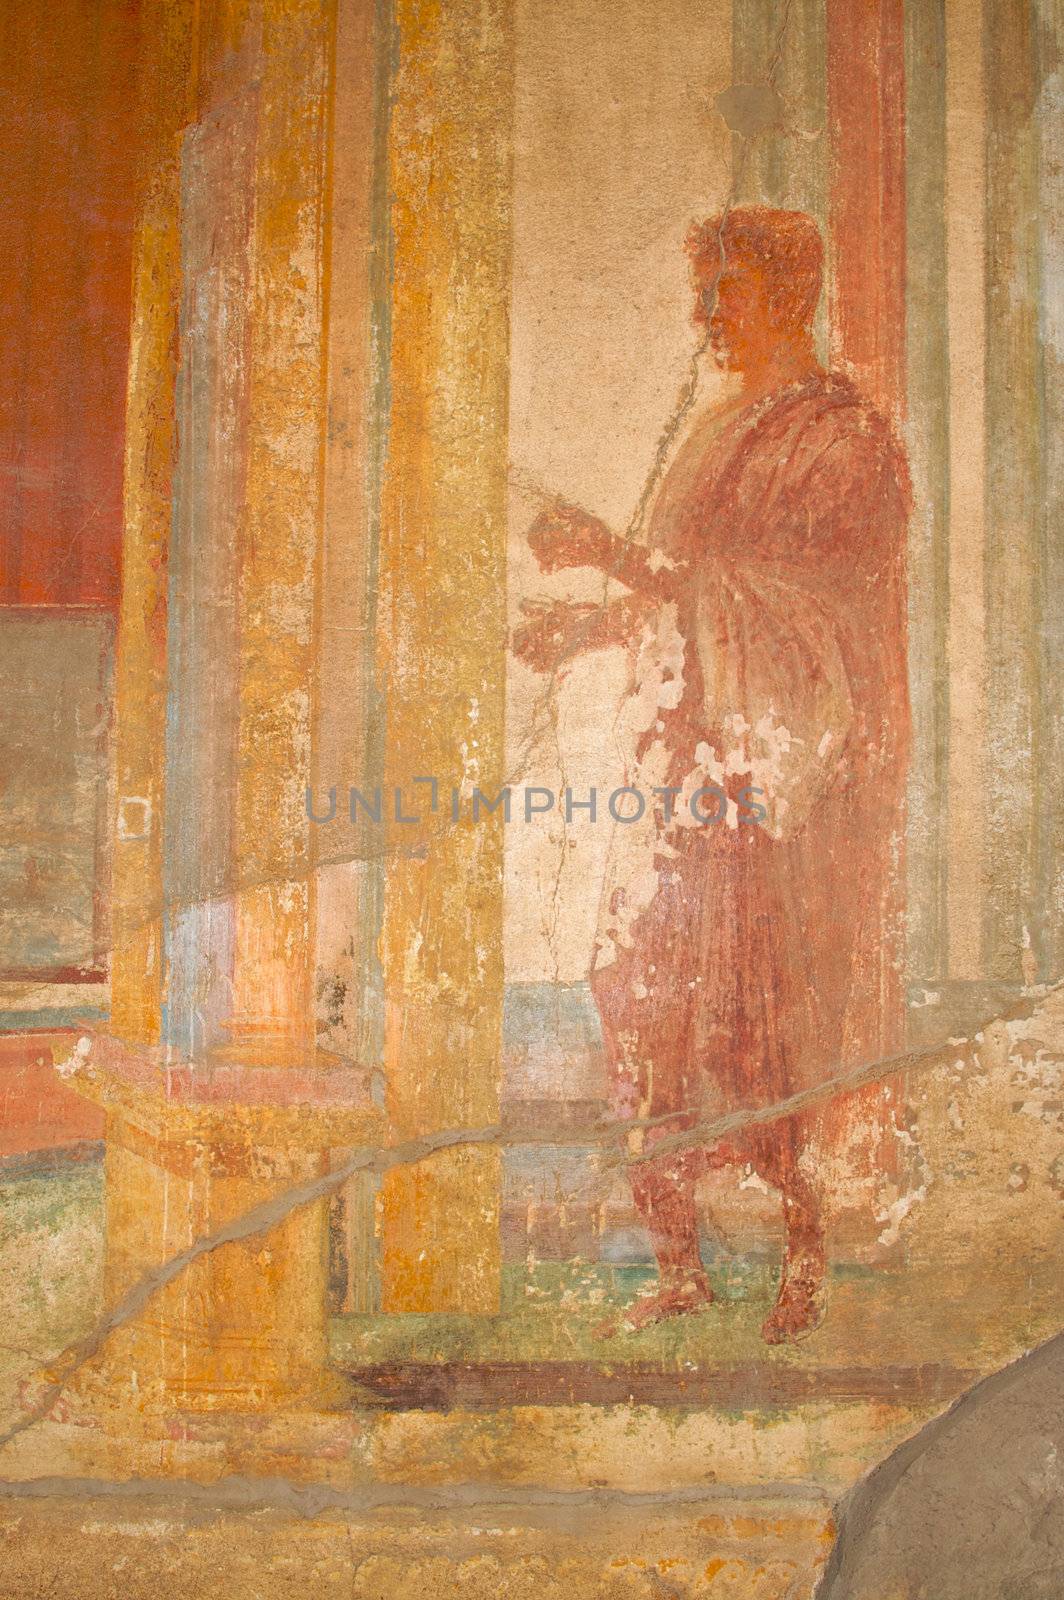 Ancient Fresco from the walls of the Pompeii, Italy ruins.